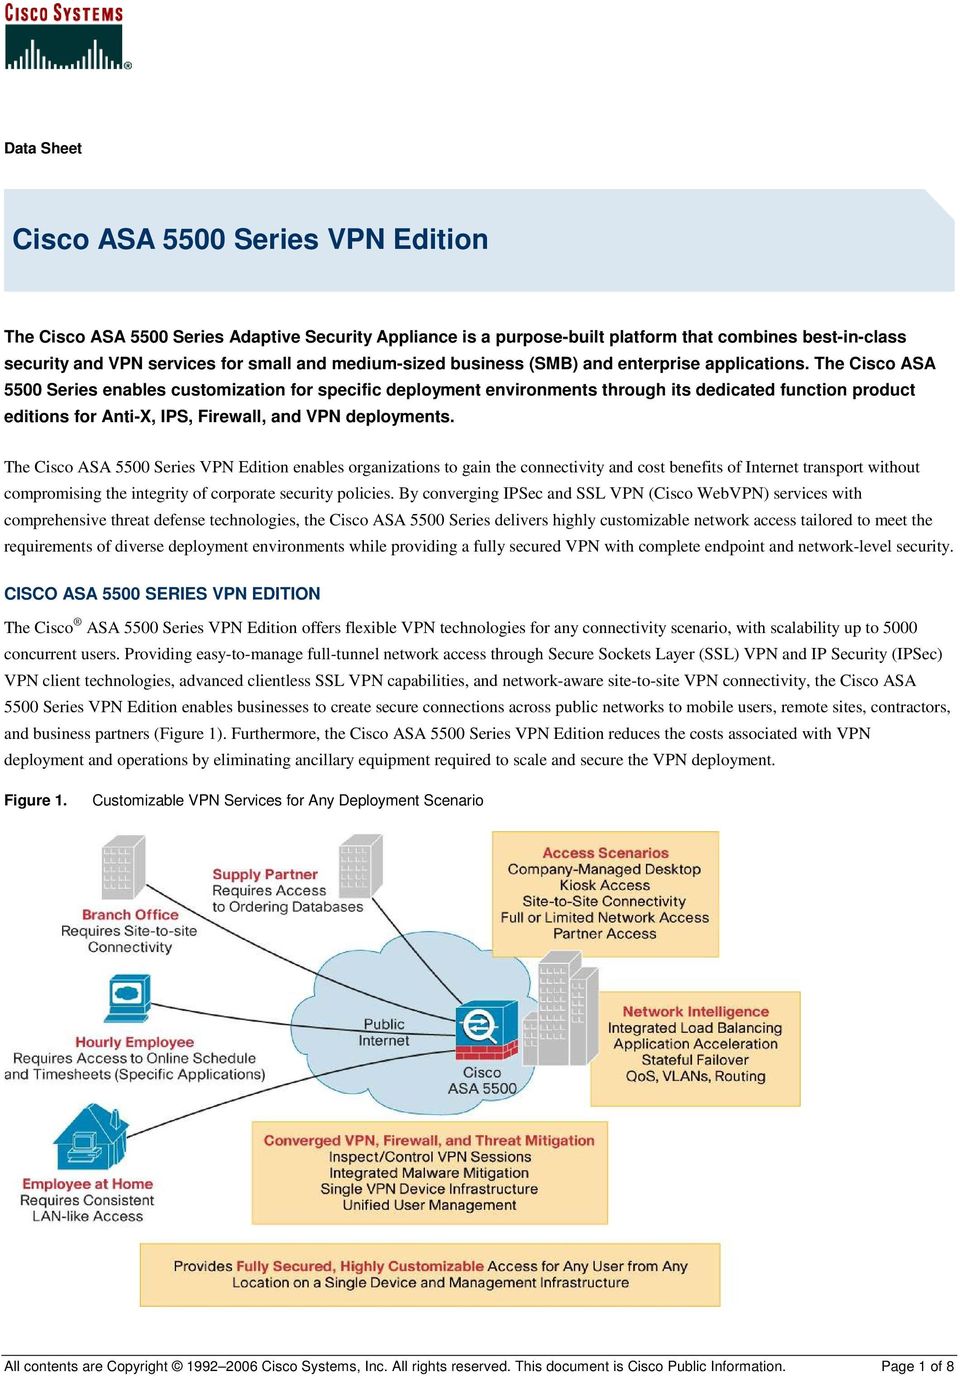 The Cisco ASA 5500 Series enables customization for specific deployment environments through its dedicated function product editions for Anti-X, IPS, Firewall, and VPN deployments.